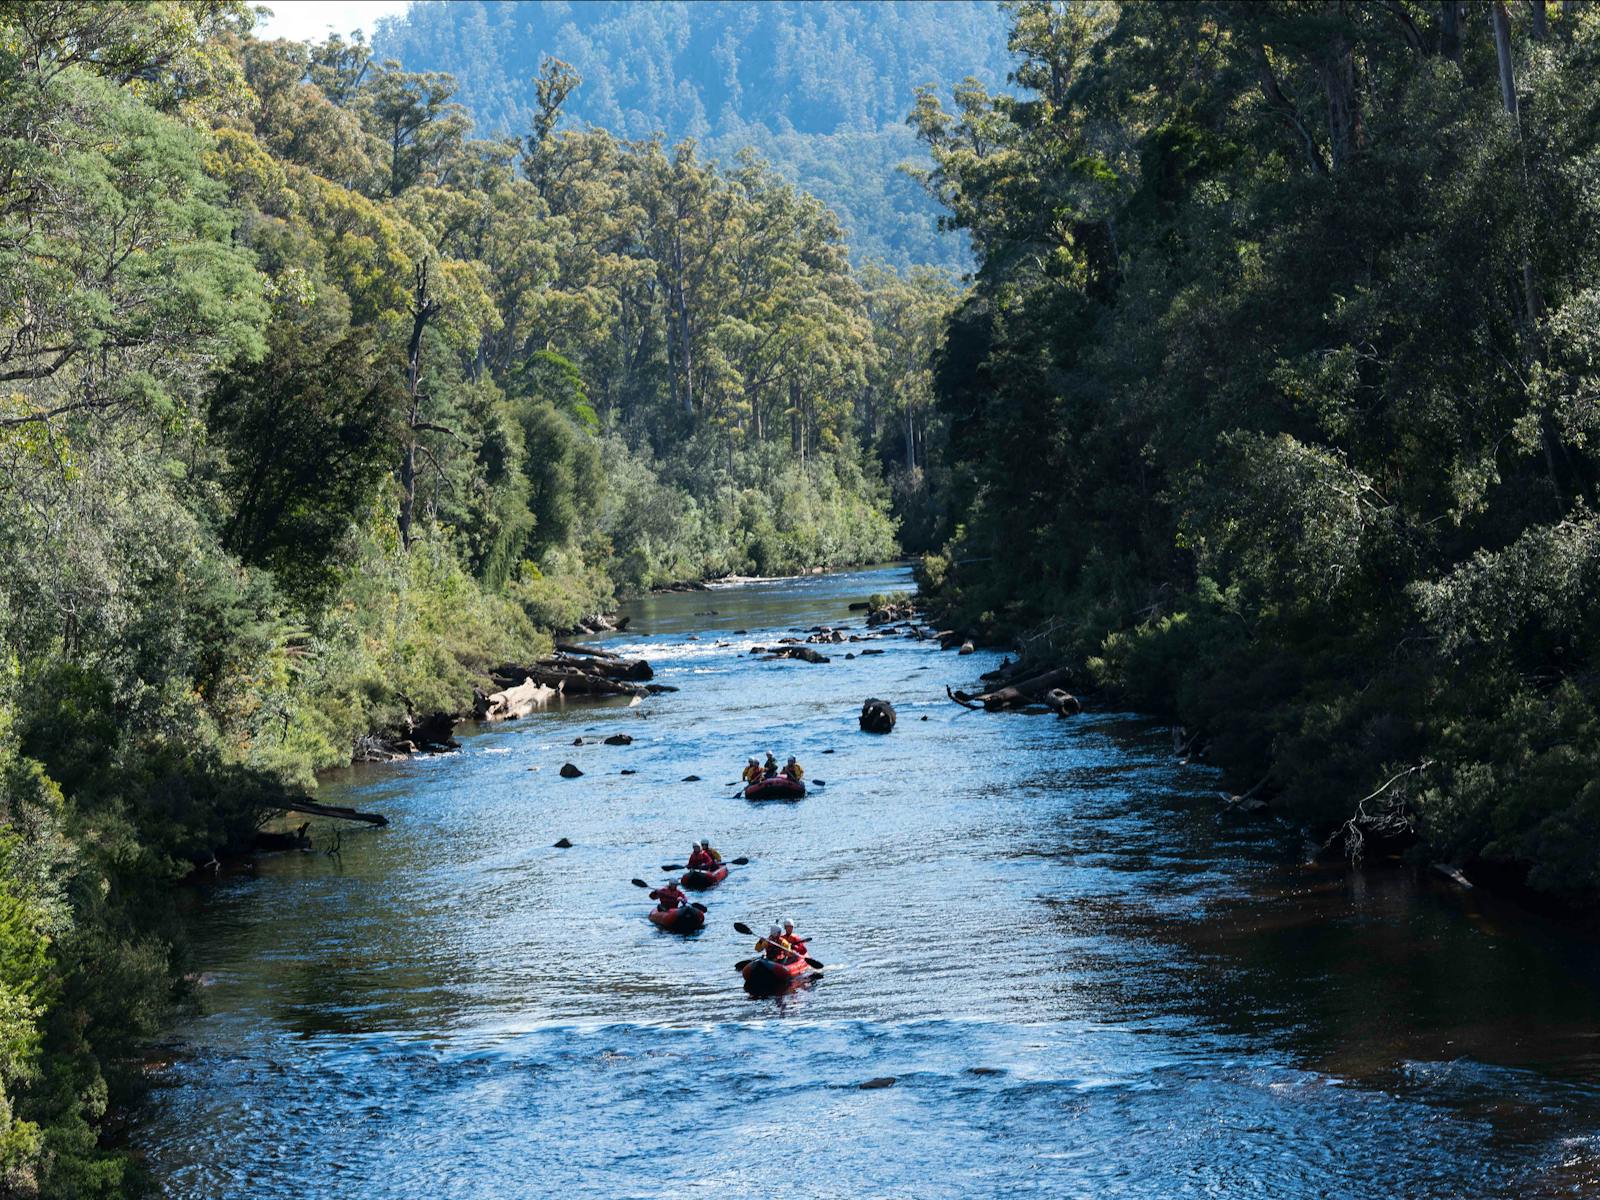 You'll see the Twin Rivers Adventure guest rafting down the Huon River while walking on the Airwalk.